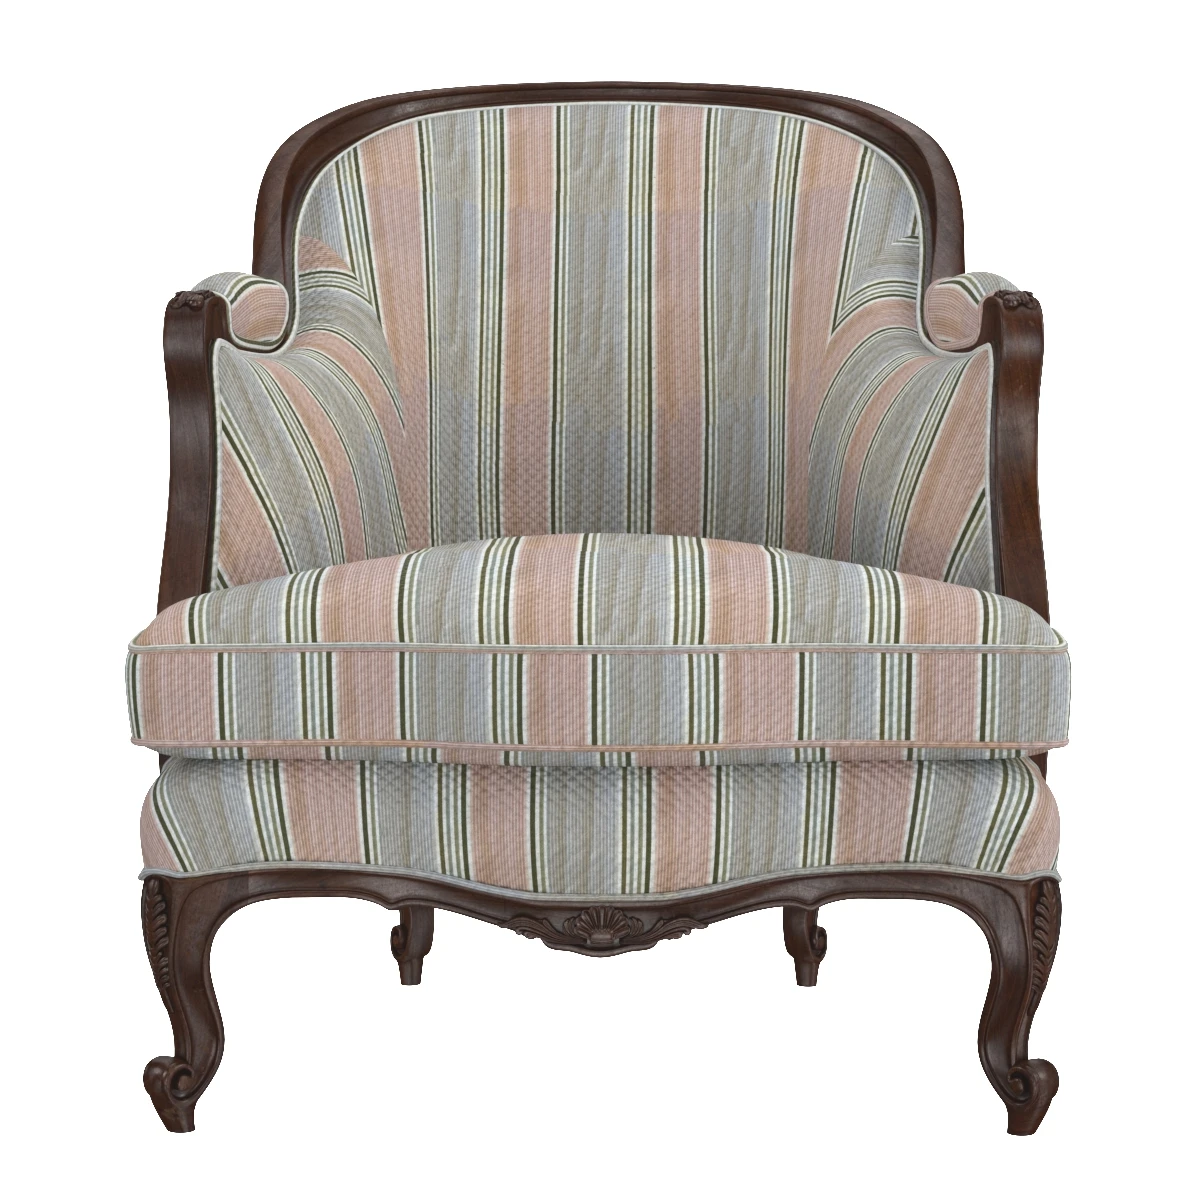 French 19th Century Walnut Bergere Chair 3D Model_06